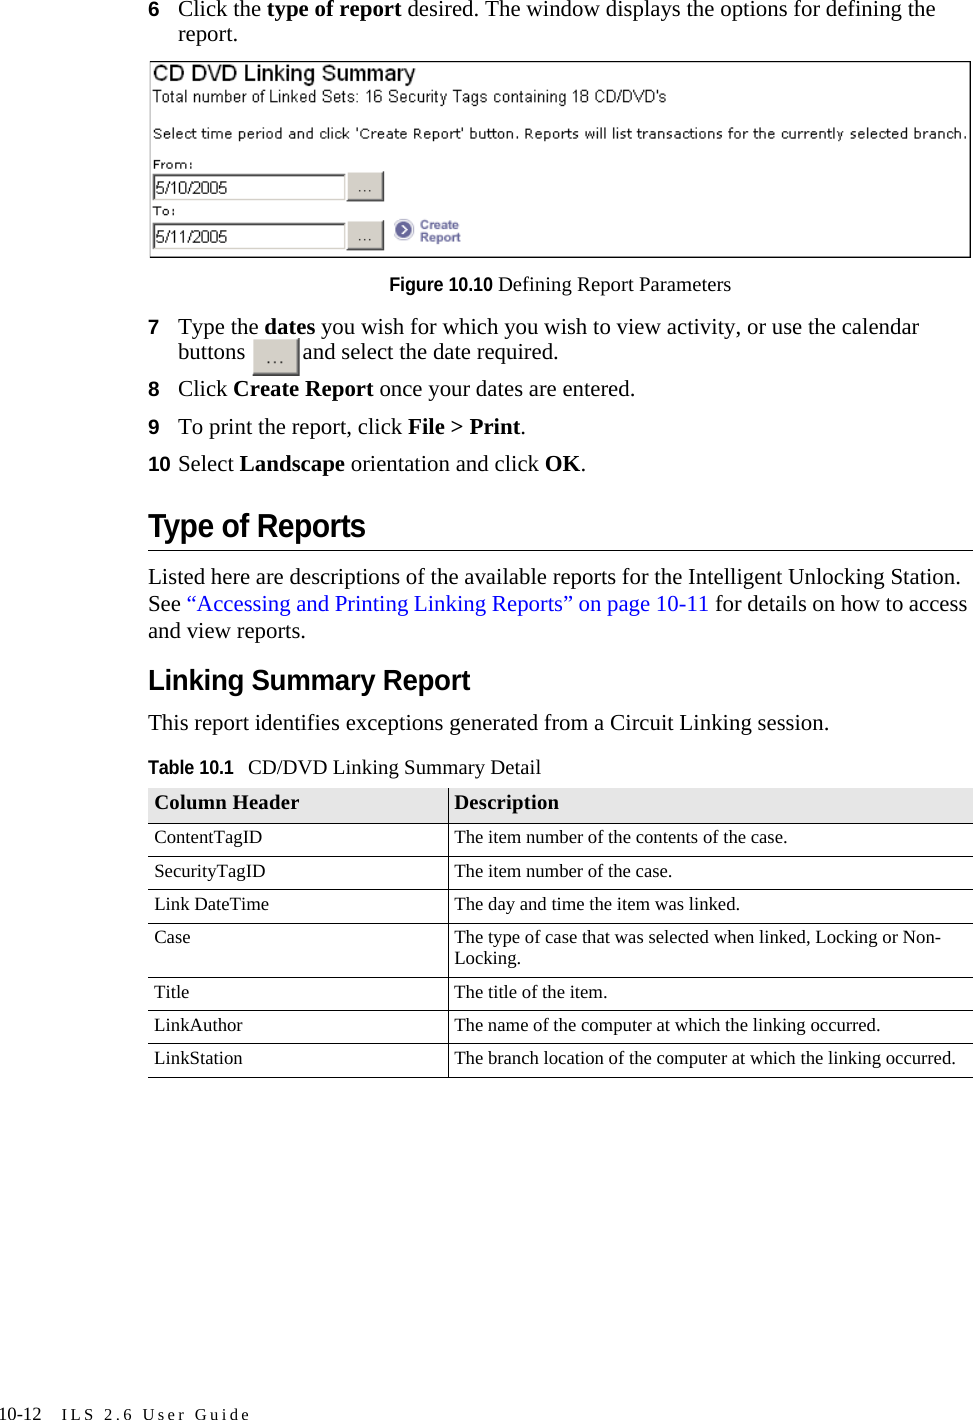 10-12 ILS 2.6 User Guide6Click the type of report desired. The window displays the options for defining the report.Figure 10.10 Defining Report Parameters7Type the dates you wish for which you wish to view activity, or use the calendar buttons  and select the date required.8Click Create Report once your dates are entered. 9To print the report, click File &gt; Print. 10 Select Landscape orientation and click OK.Type of ReportsListed here are descriptions of the available reports for the Intelligent Unlocking Station. See “Accessing and Printing Linking Reports” on page 10-11 for details on how to access and view reports.Linking Summary ReportThis report identifies exceptions generated from a Circuit Linking session.Table 10.1CD/DVD Linking Summary DetailColumn Header DescriptionContentTagID The item number of the contents of the case.SecurityTagID The item number of the case.Link DateTime The day and time the item was linked.Case The type of case that was selected when linked, Locking or Non-Locking.Title The title of the item.LinkAuthor The name of the computer at which the linking occurred.LinkStation The branch location of the computer at which the linking occurred.